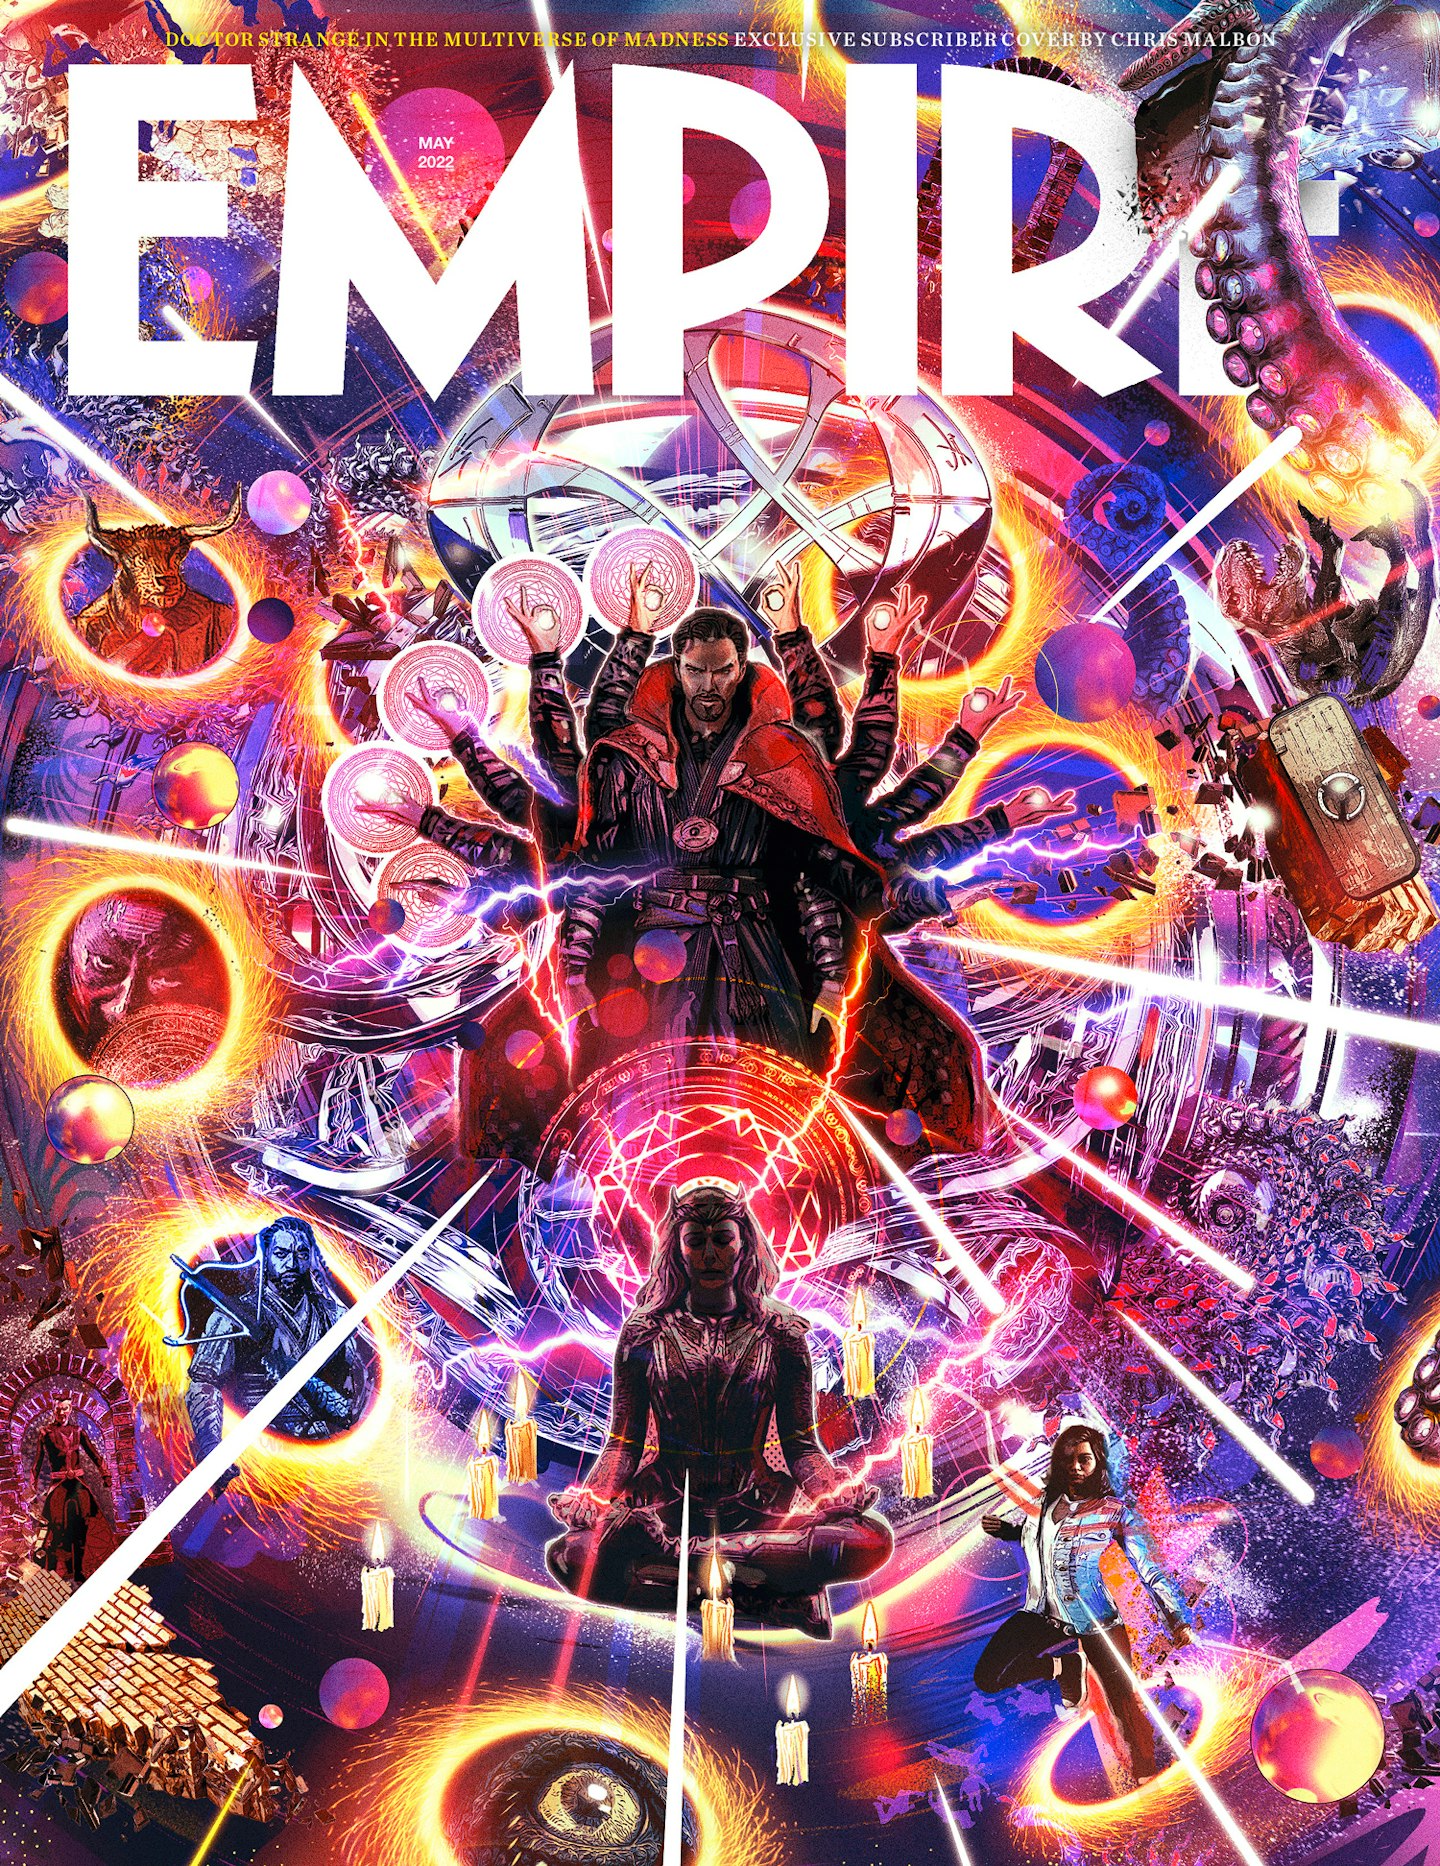 Empire – May 2022 subscriber cover